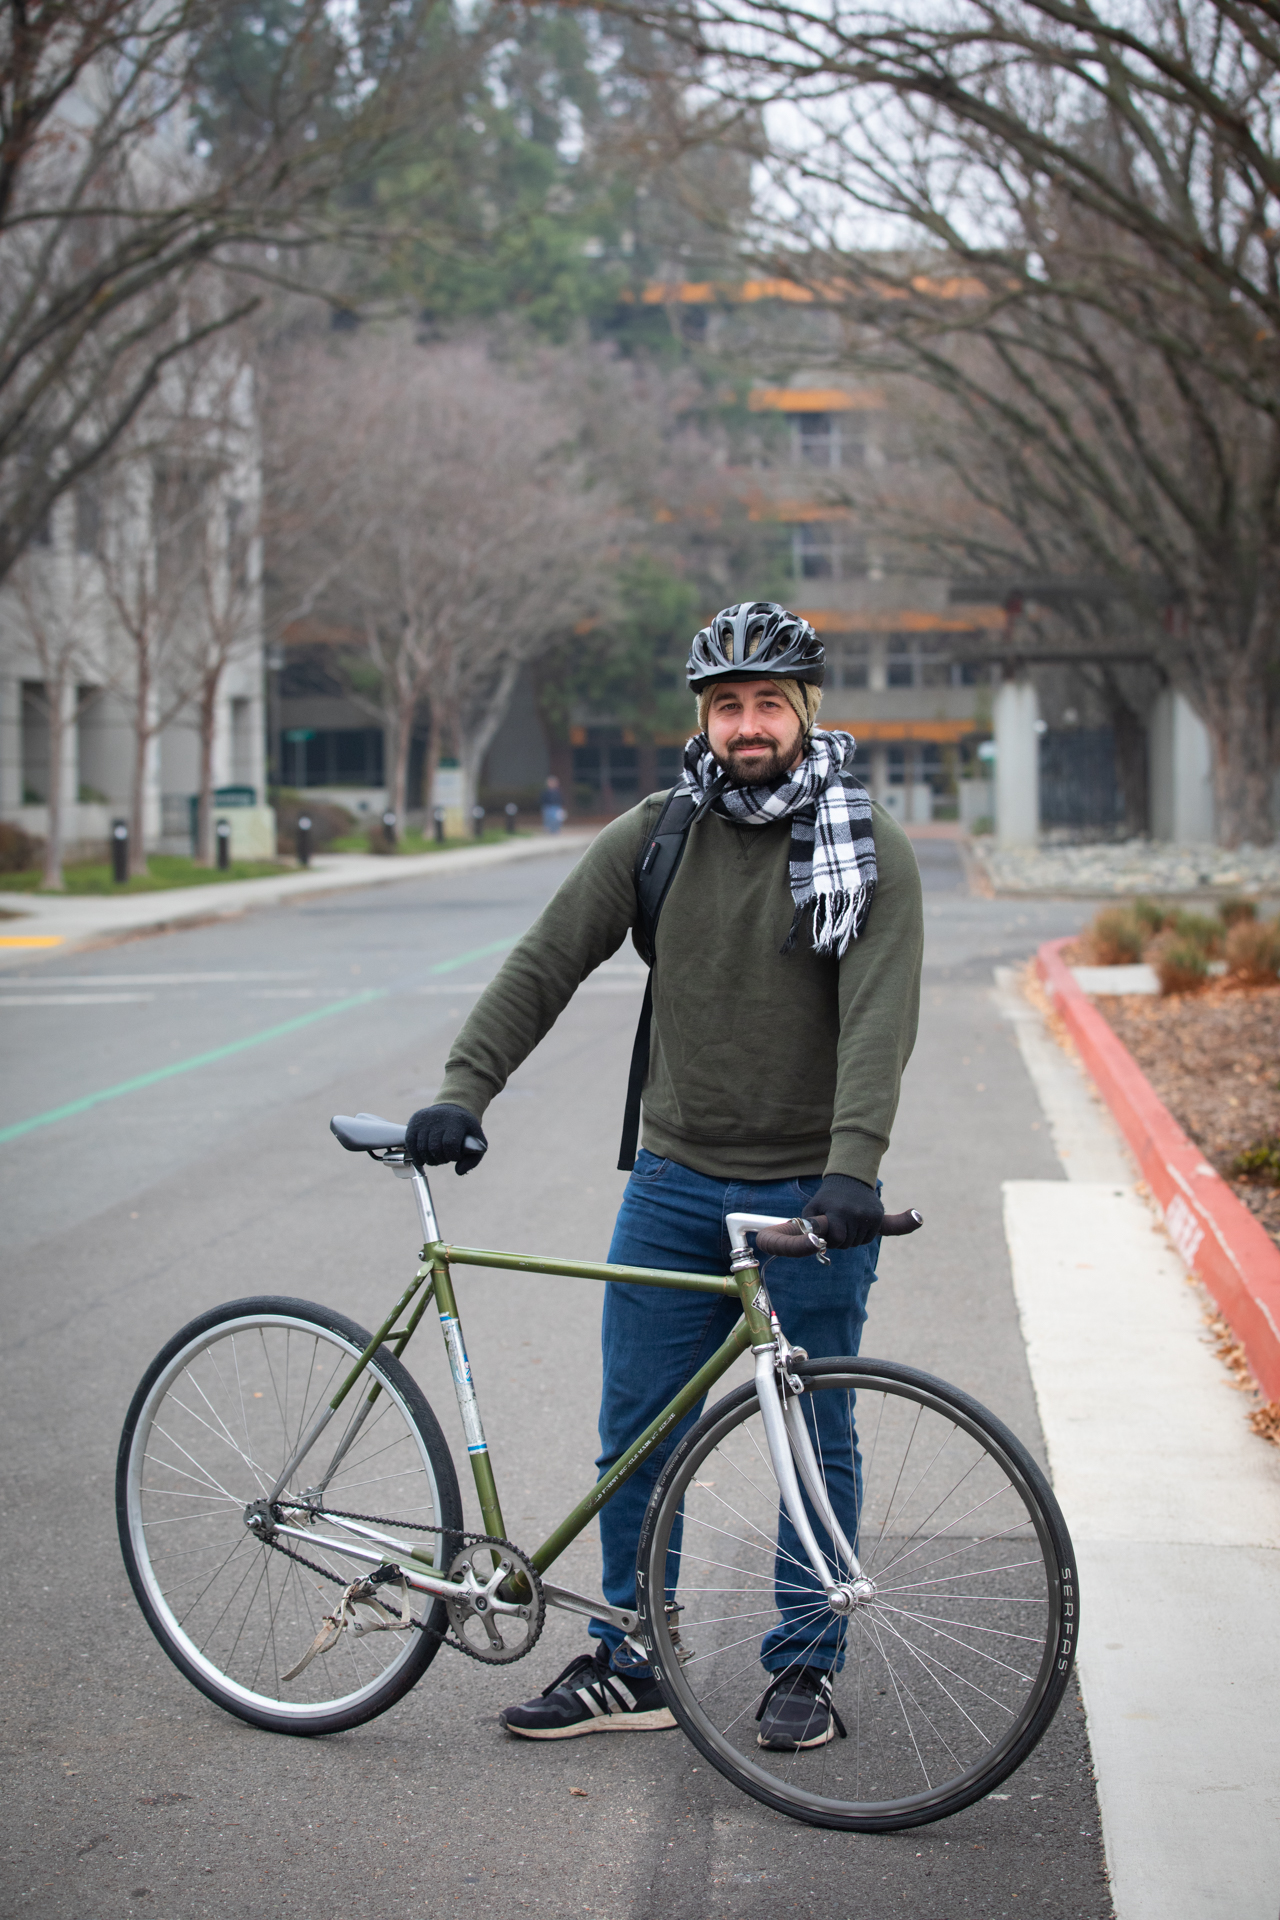 Sacramento State employee Joshua Maddox poses with his bicycle on campus. 